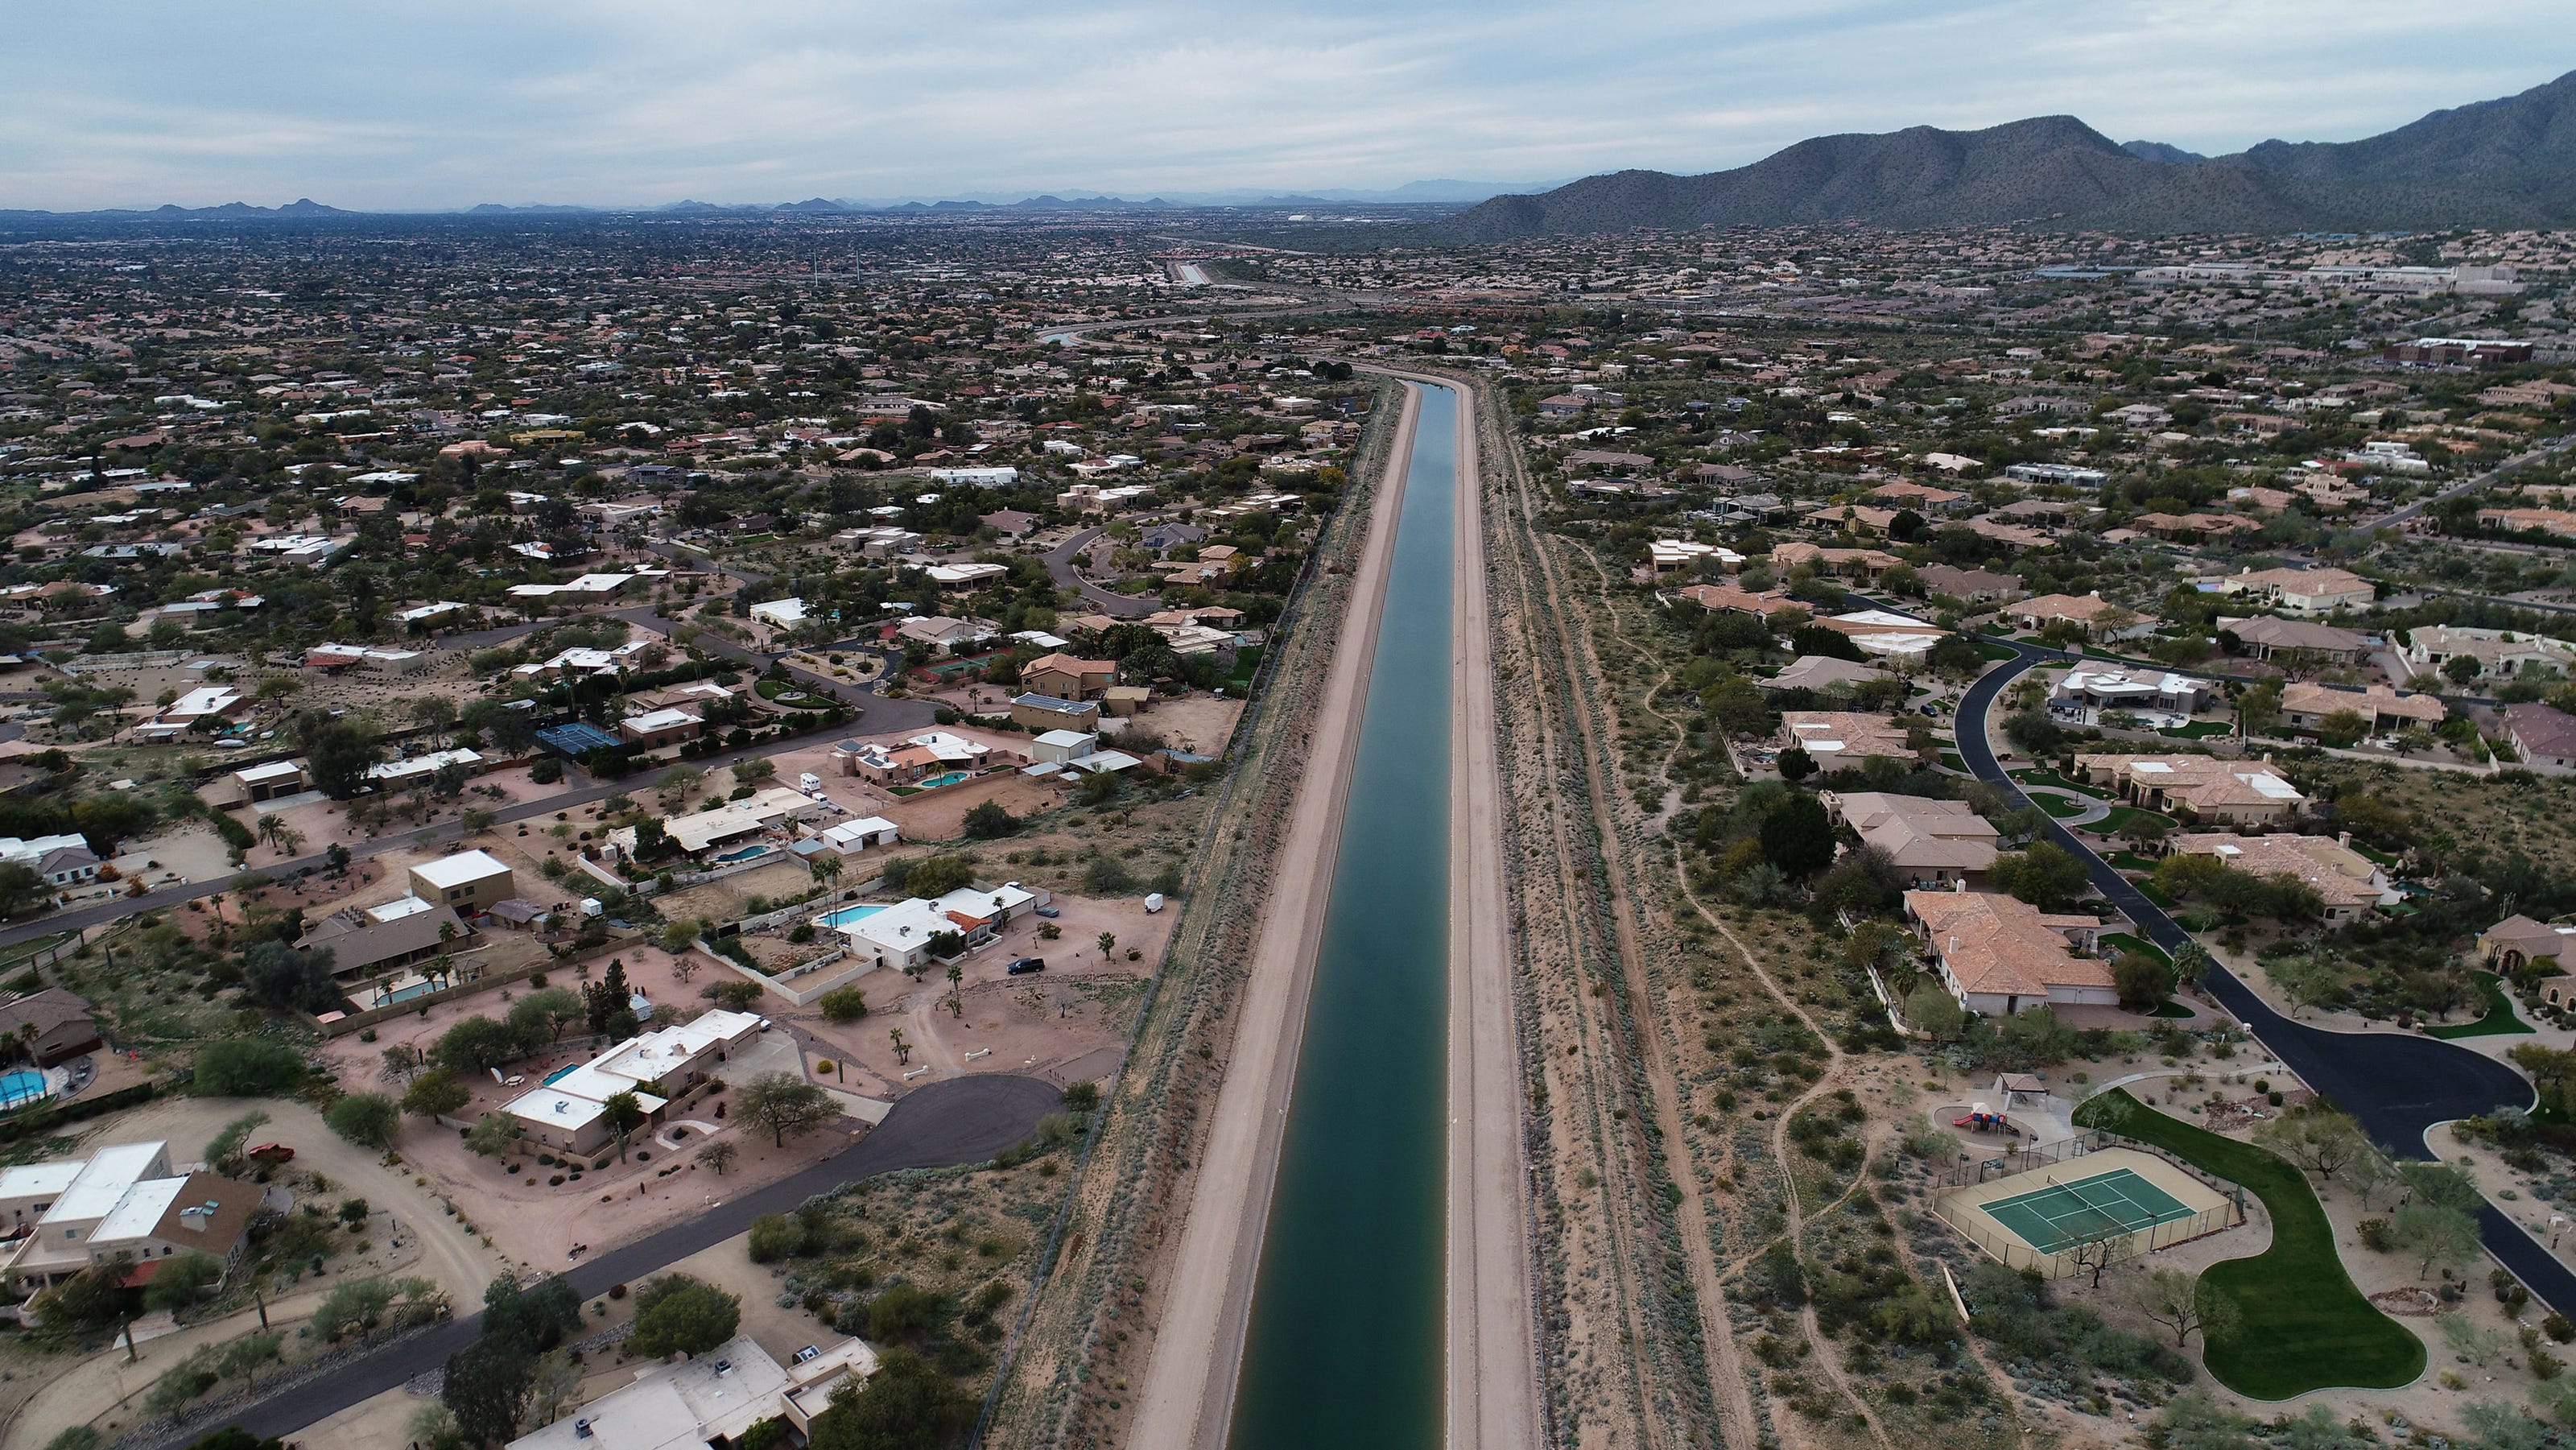 Arizona will have to dig deep for money as water shortage worsens - The Arizona Republic